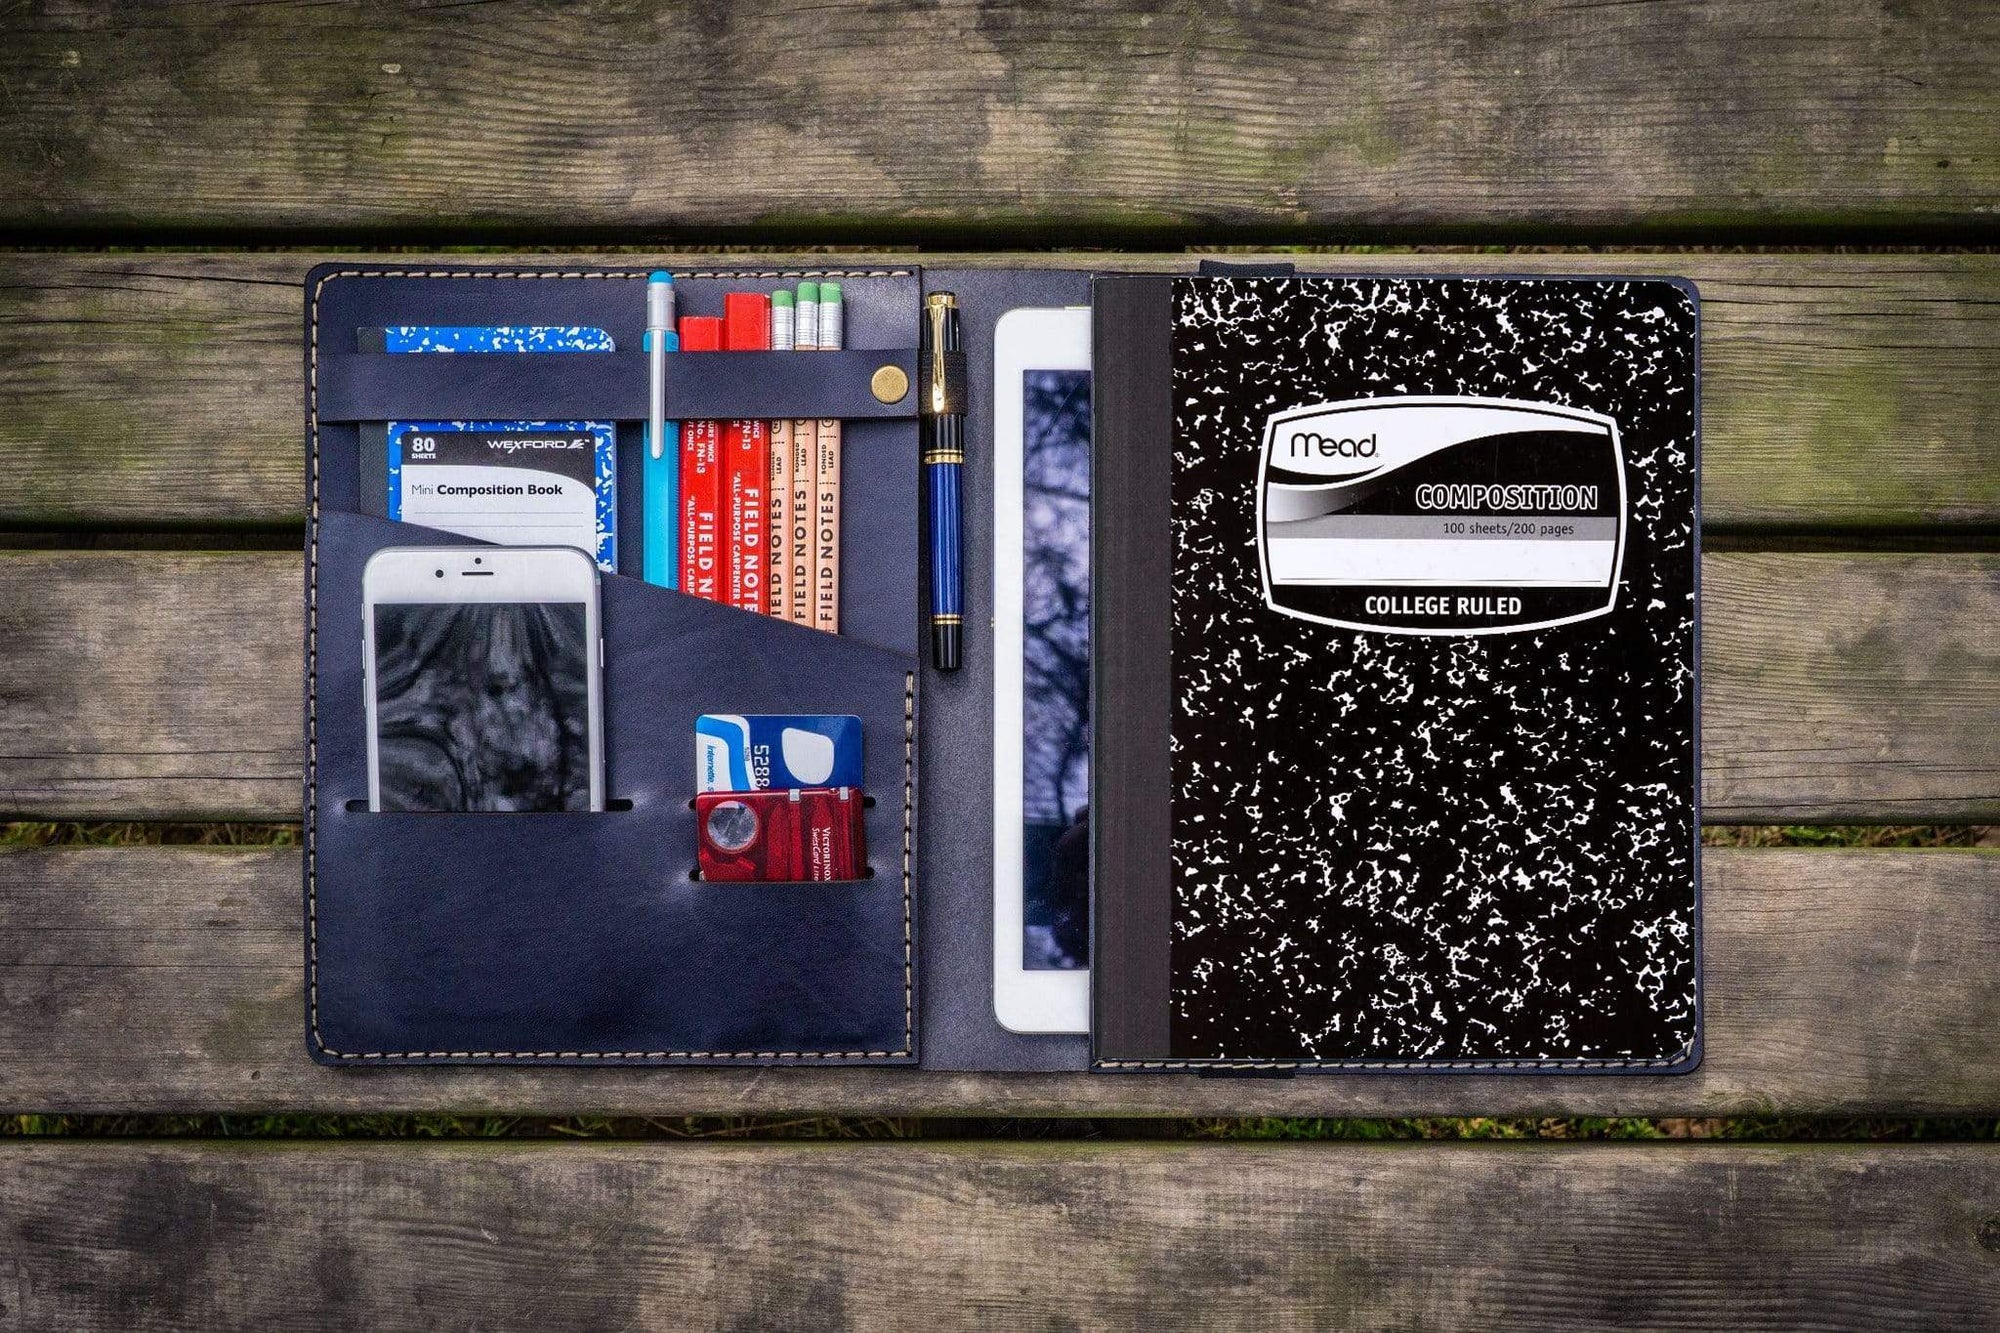 Composition Notebook Cover With iPad Air/Pro Pocket - Navy Blue-Galen Leather